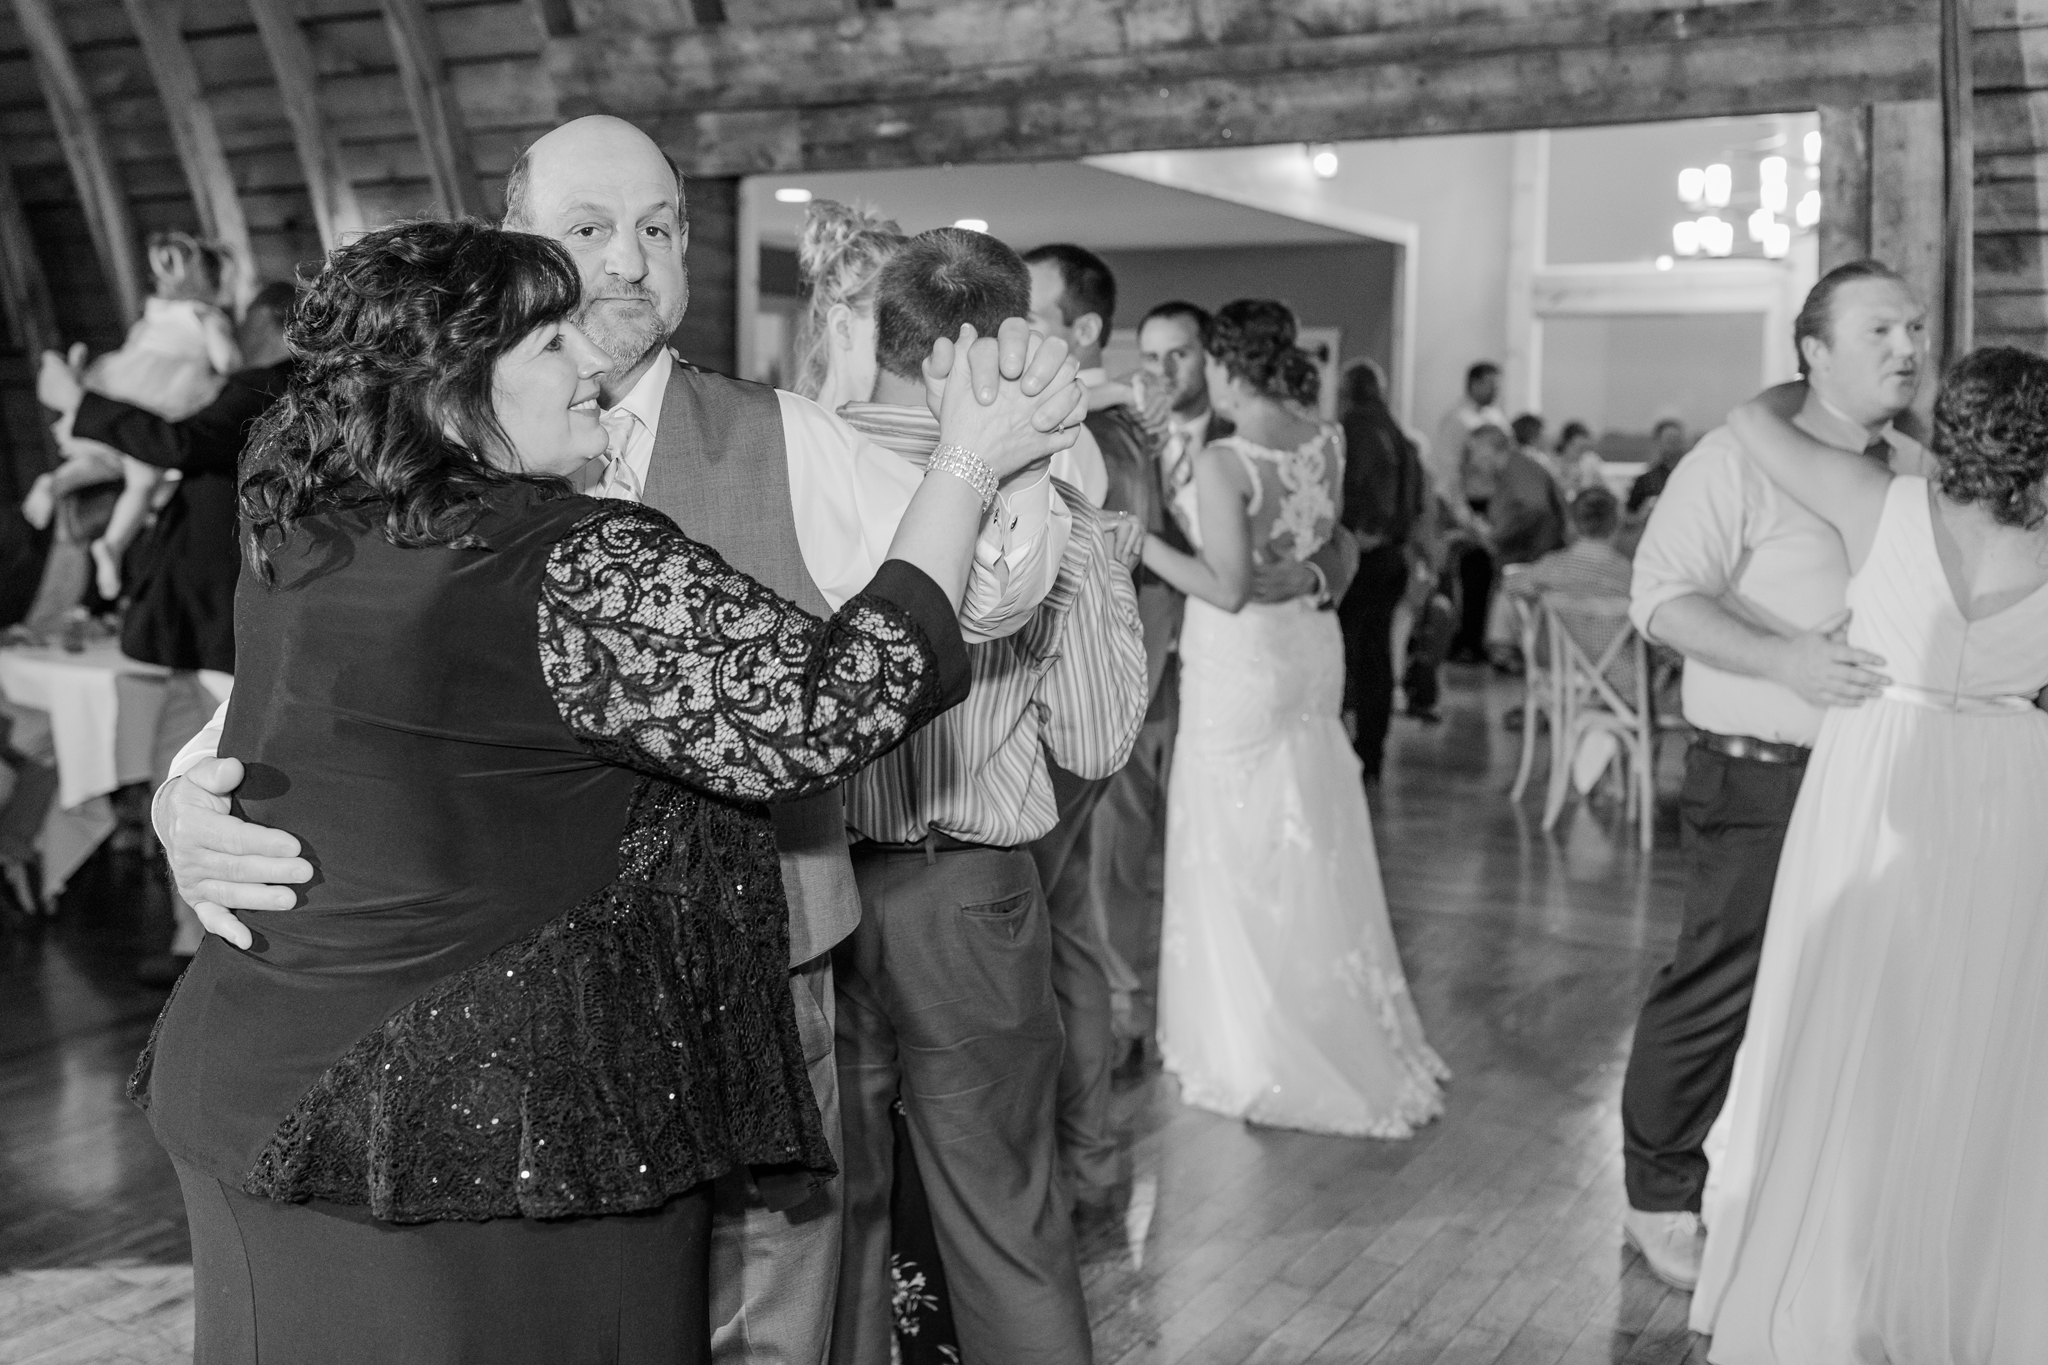 Rustic Oaks Wedding Photography, Brittney and Caleb